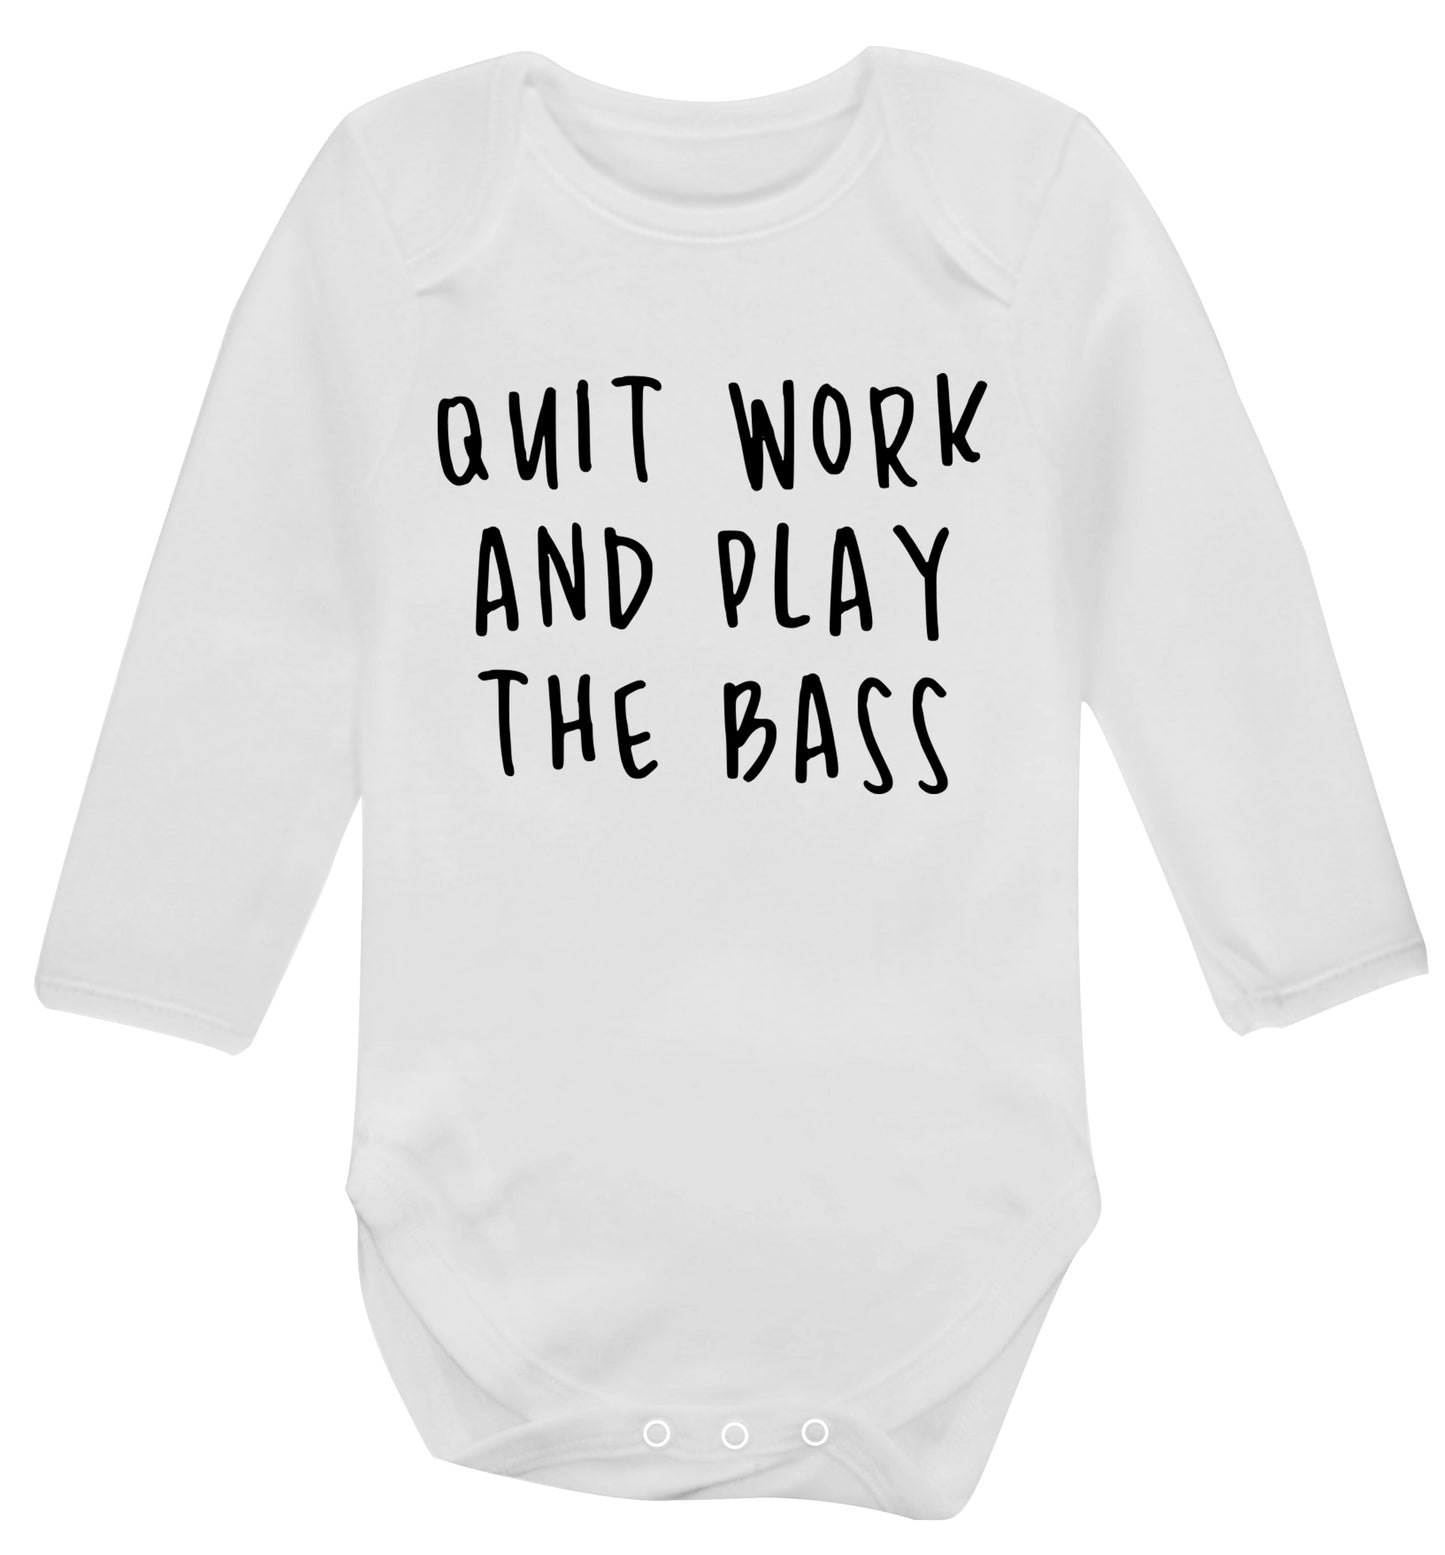 Quit work and play the bass Baby Vest long sleeved white 6-12 months